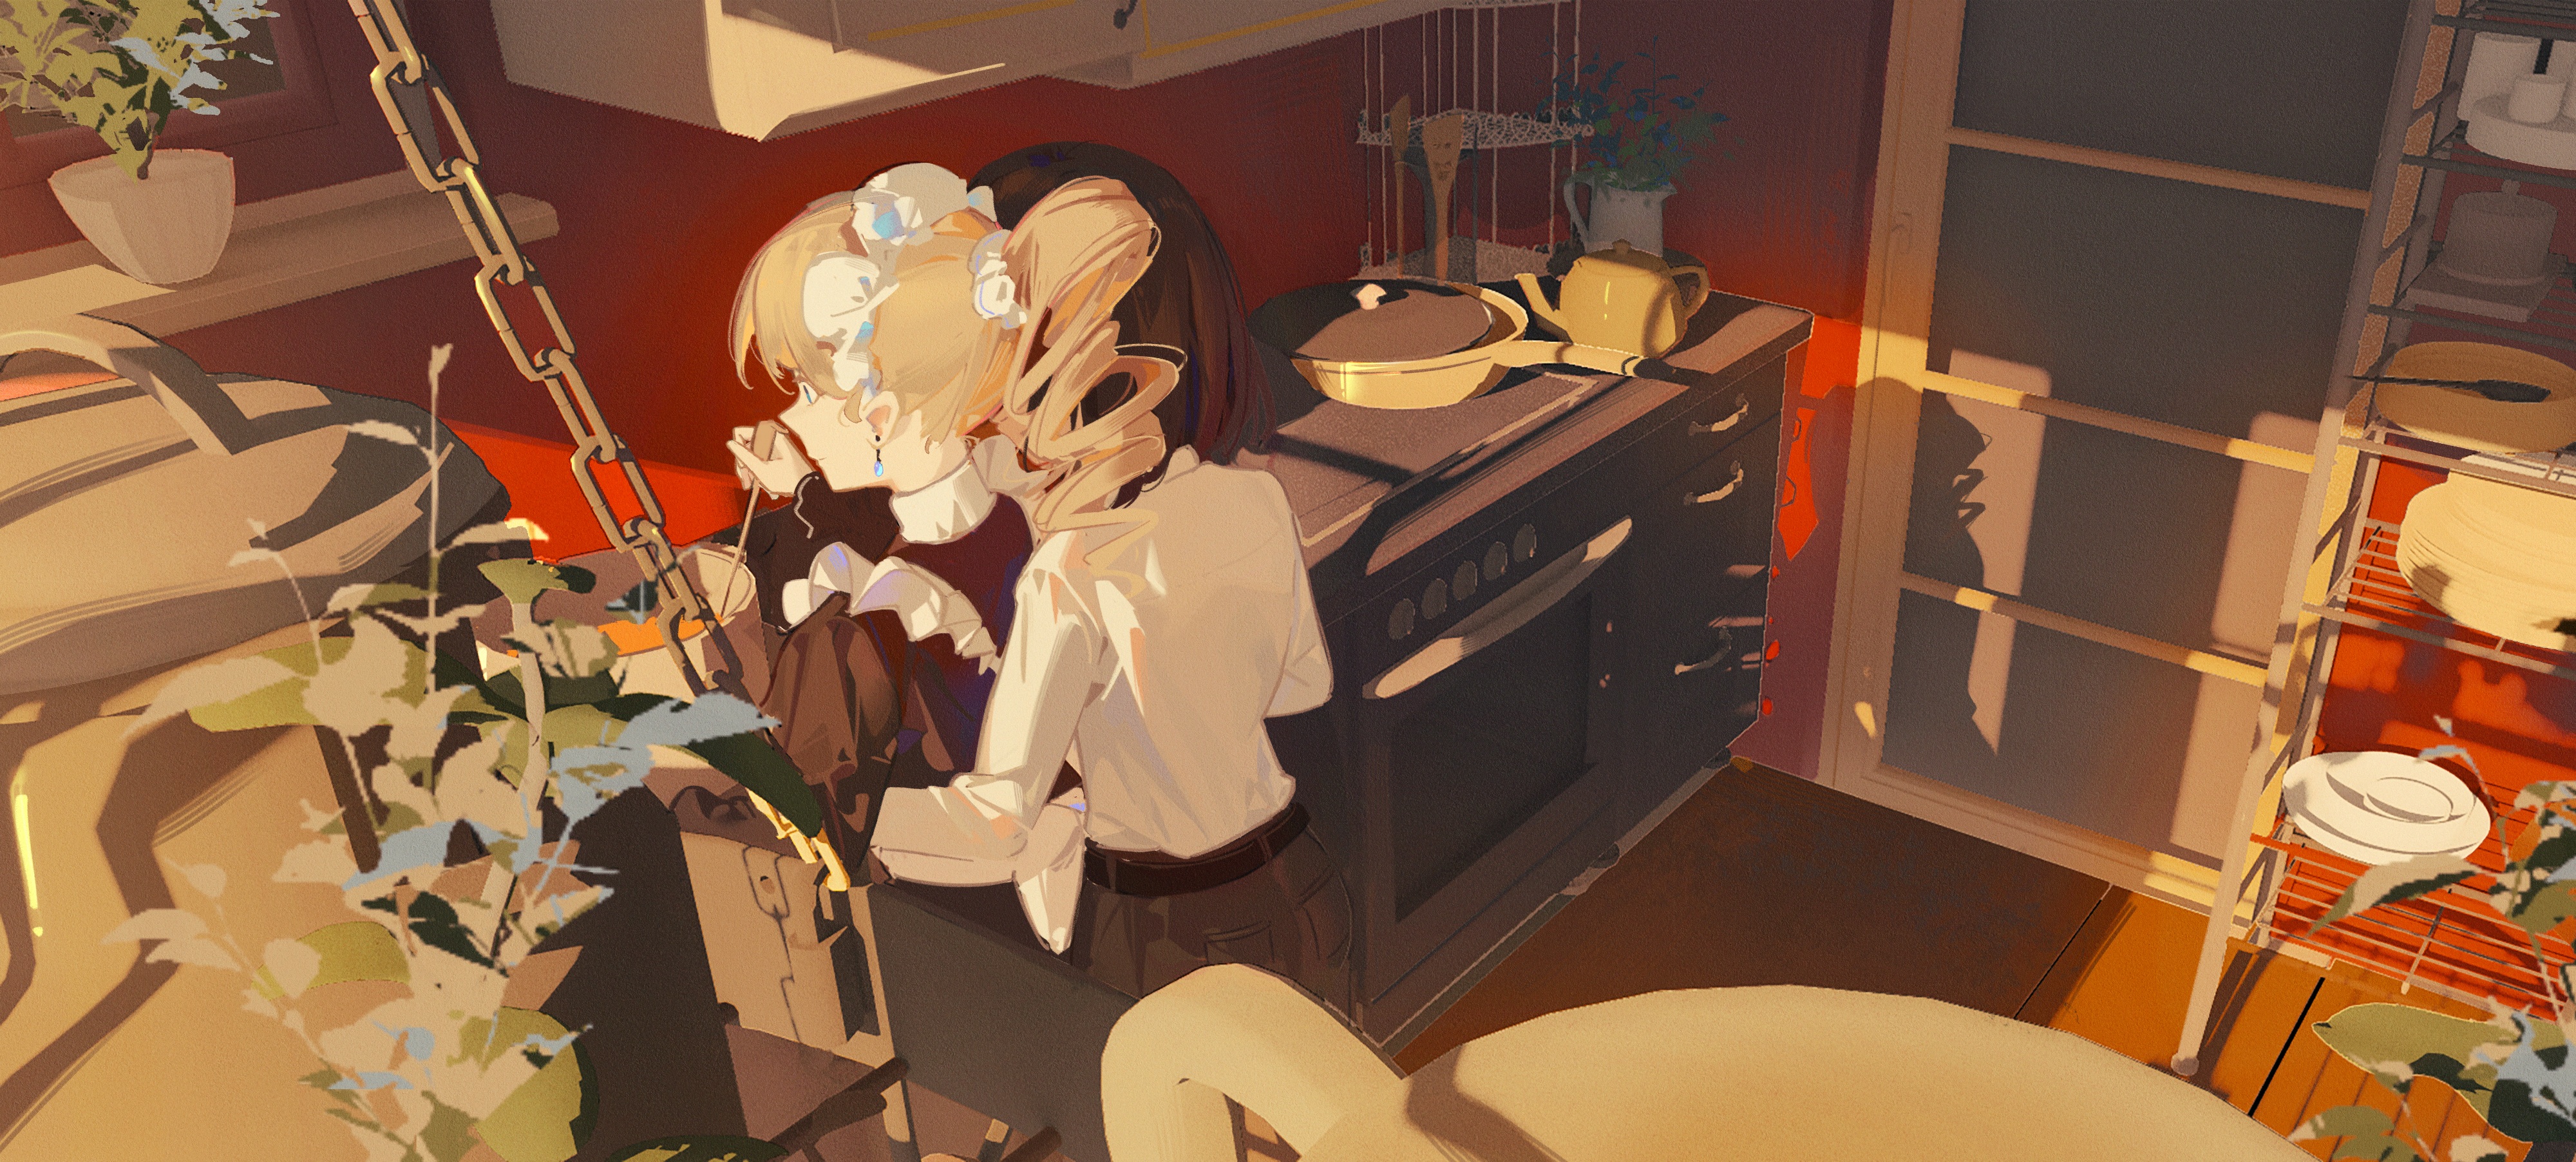 Anime Anime Girls Two Women Cooking Kitchen Blonde Women Indoors Pans Tool Oven 4000x1804